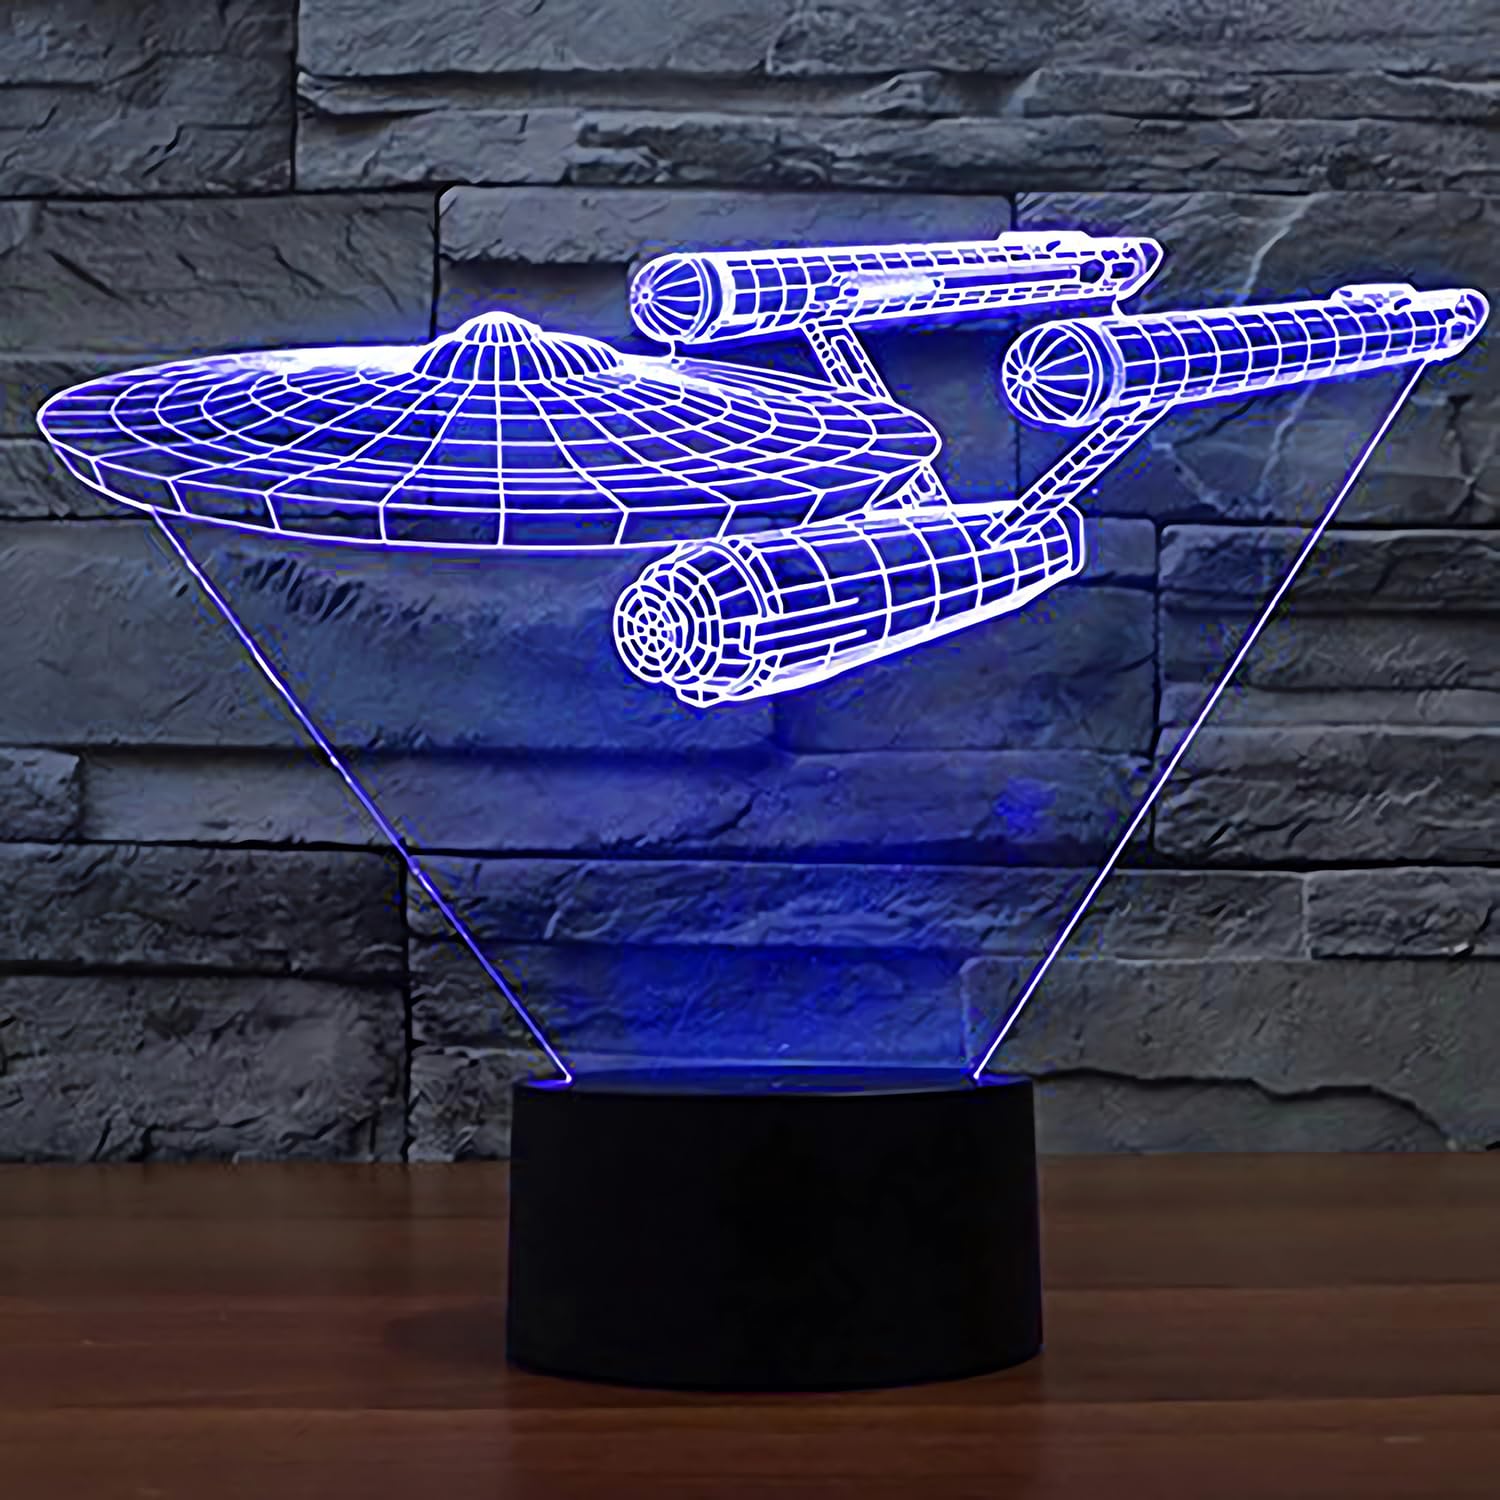 Great Choice Products Night Lights 3D Optical Illusion Multi-Colored Change Touch Controlled Desk Lamp Battleship Bedside Lamp Christmas Gifts…